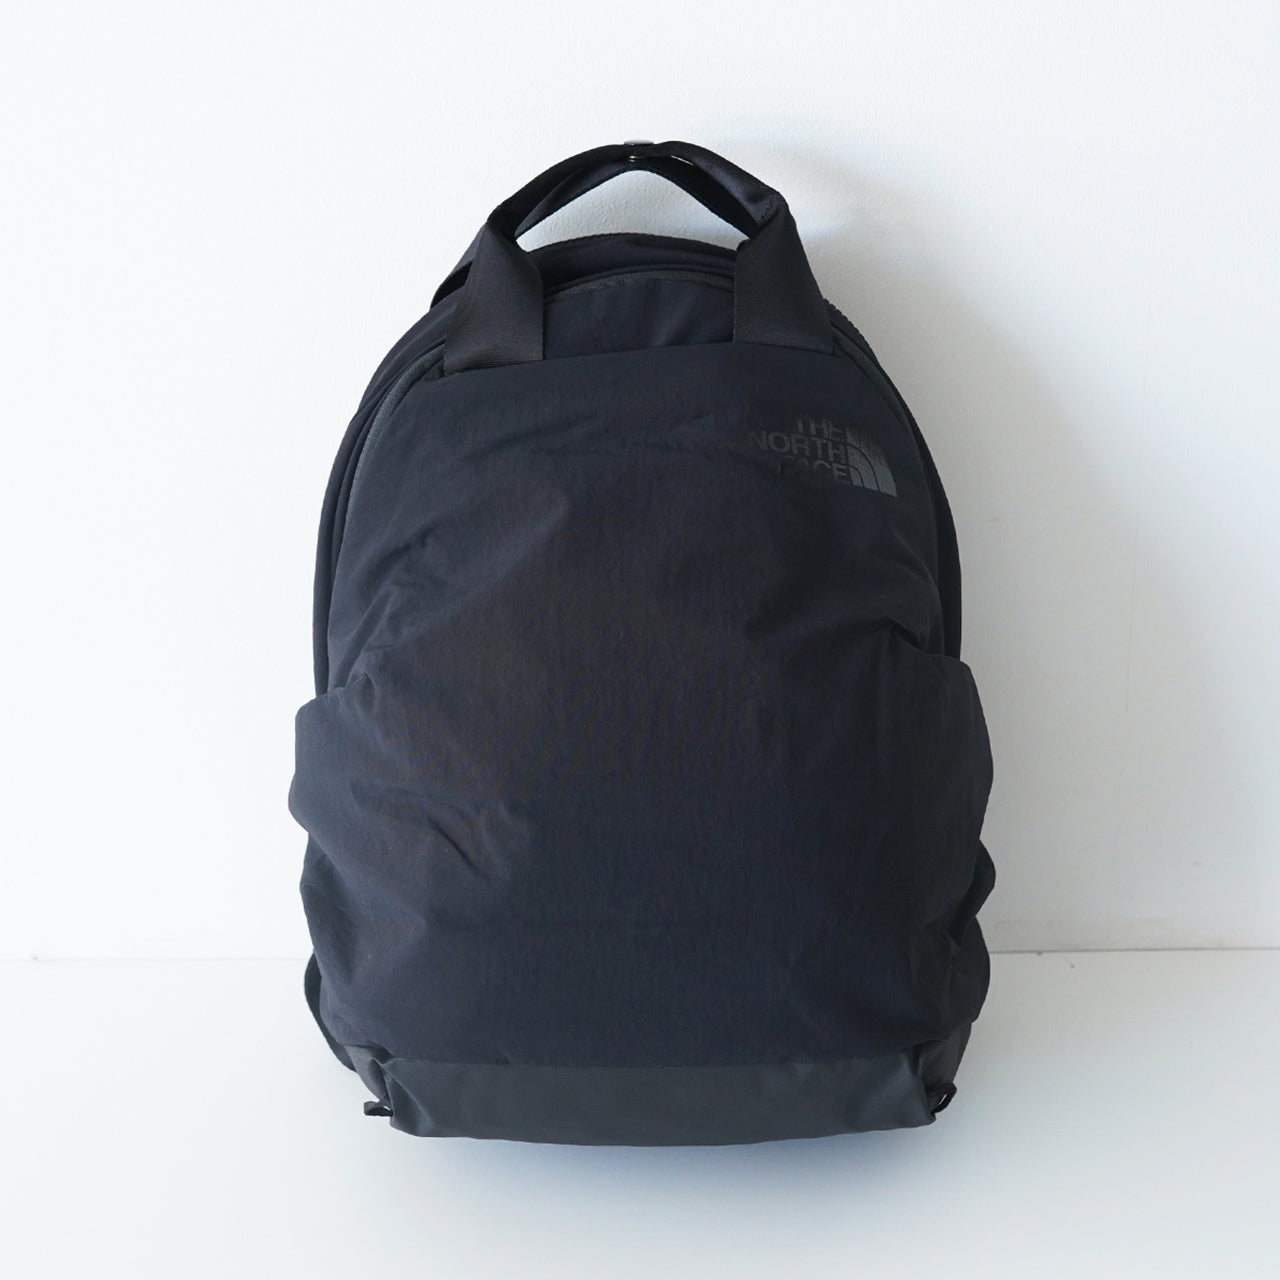 THE NORTH FACE ノースフェイス ネバーストップ デイパック W Never Stop Daypack 18L バックパック  リュックサック NMW82350【送料無料】